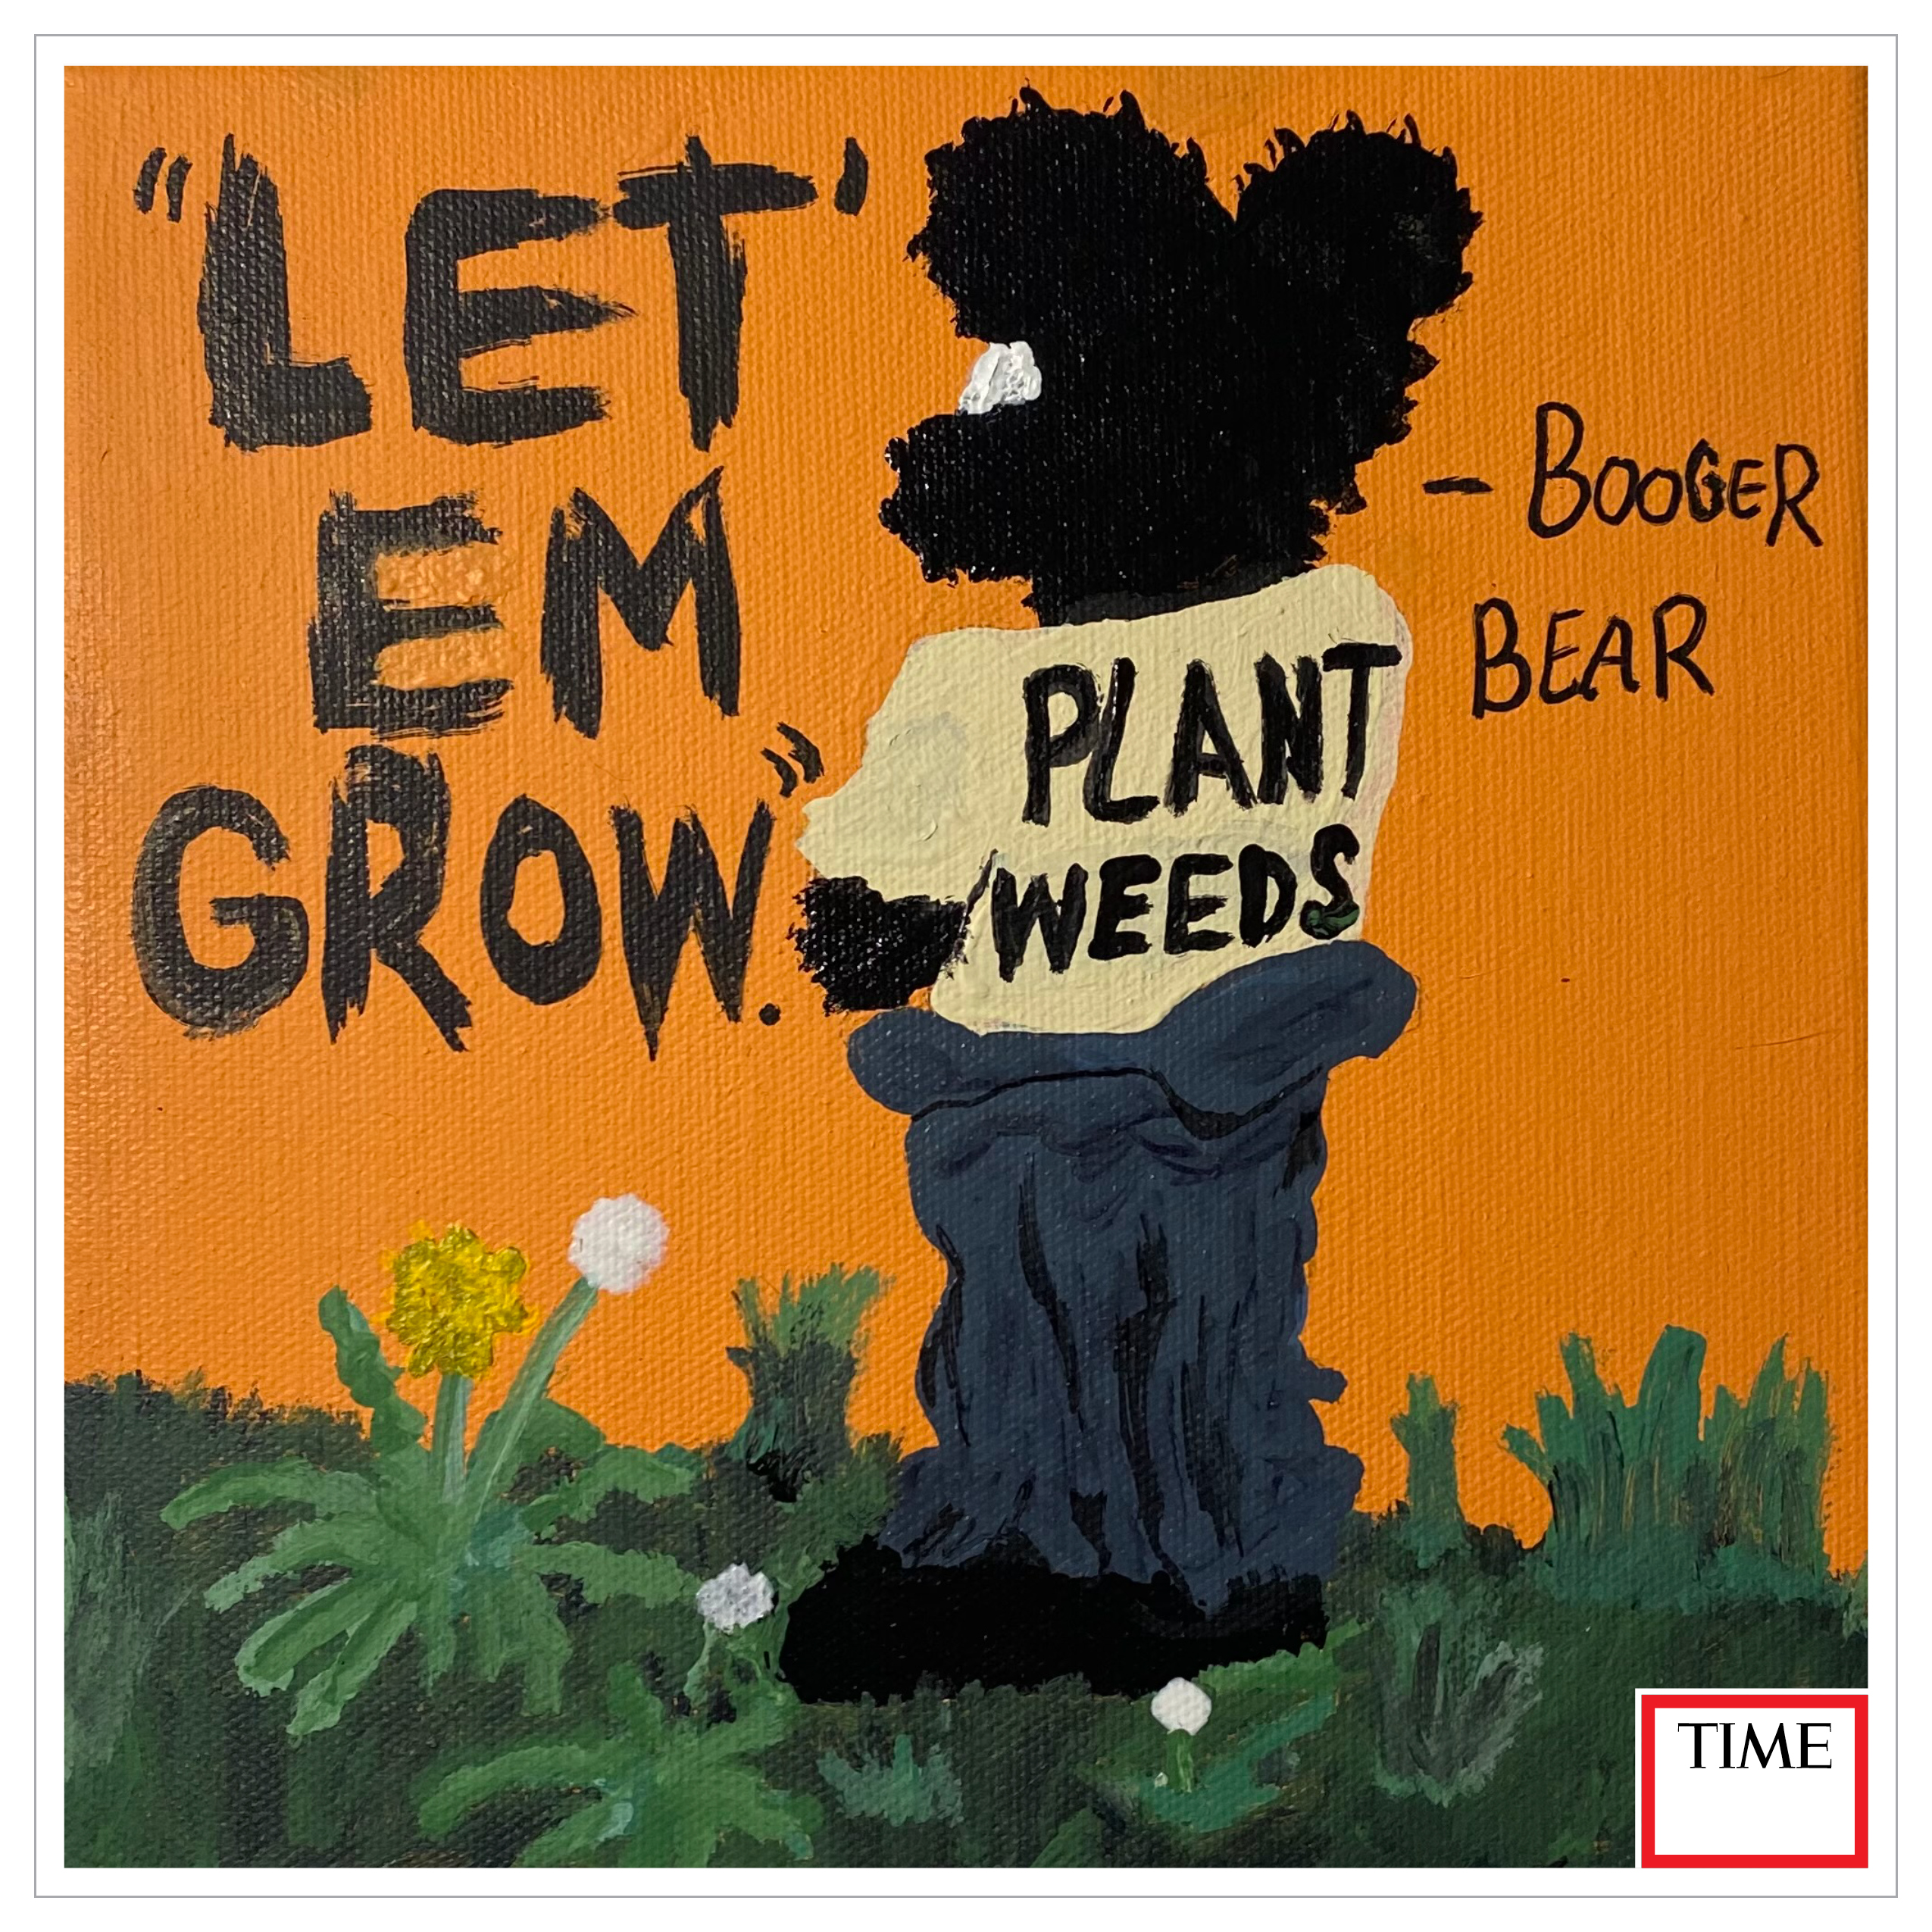 Booger Bear In Garden by Kendall Chambers